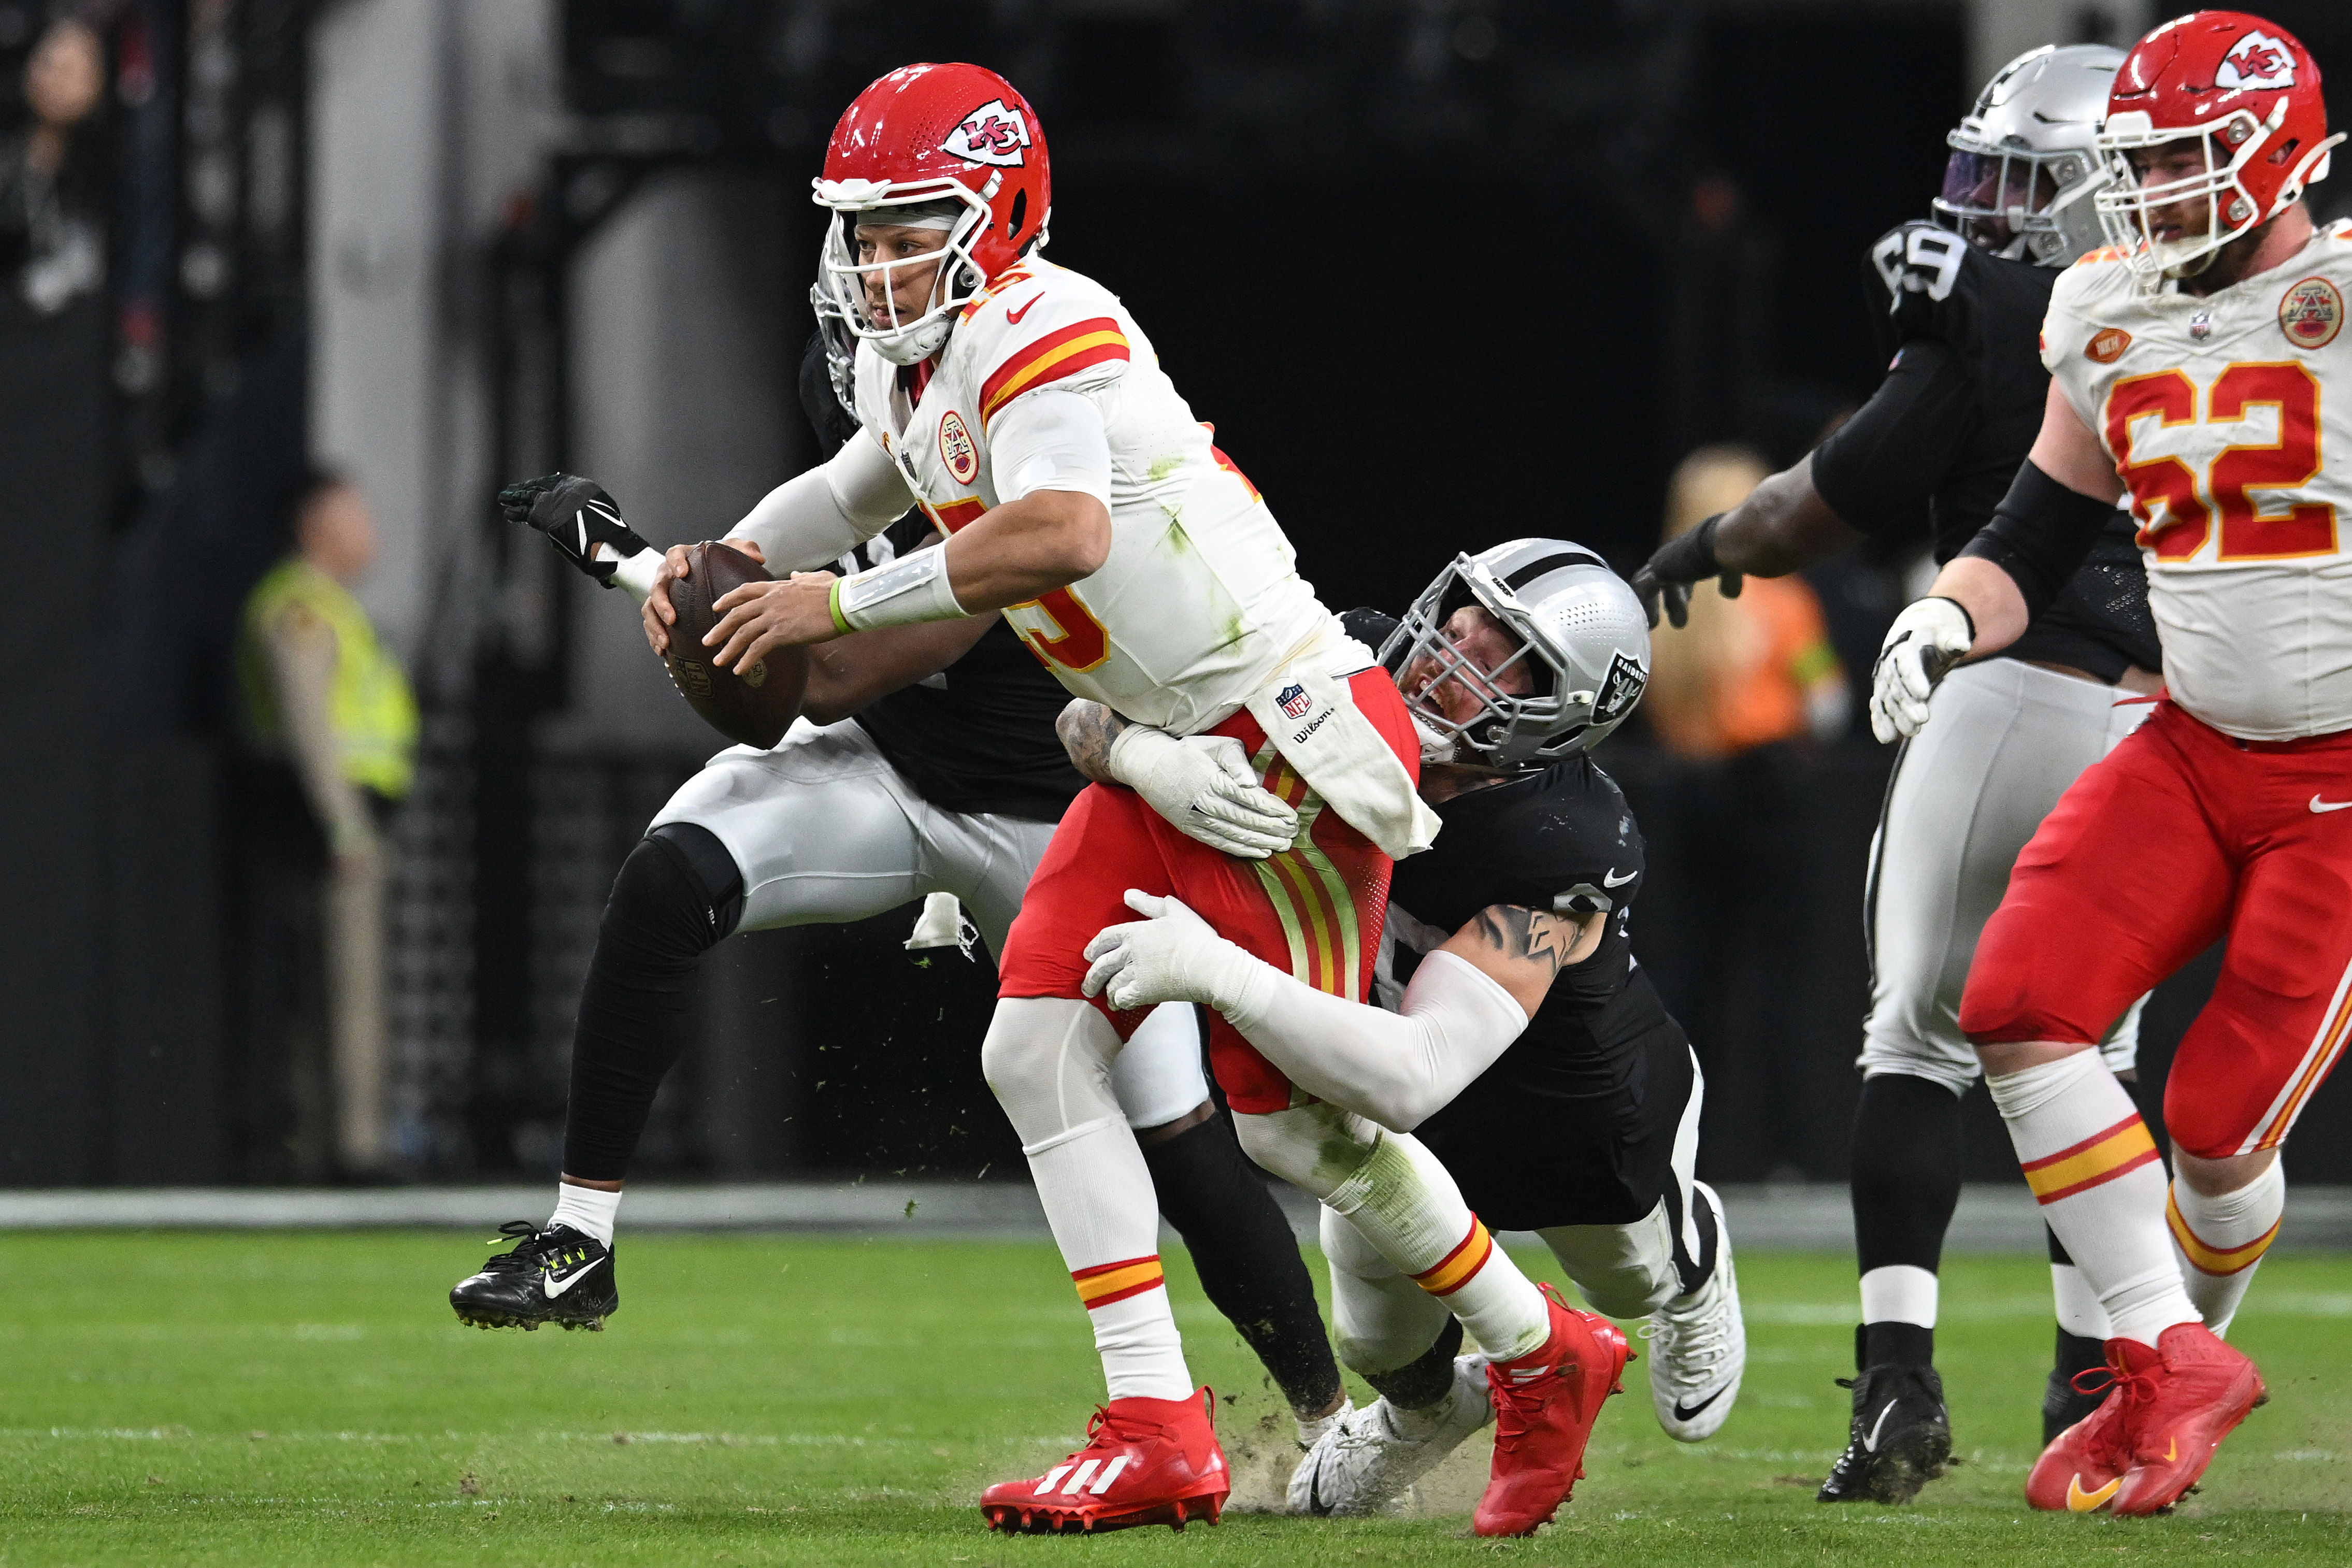 The Raiders have had success against Mahomes before but the Chiefs always win in the end